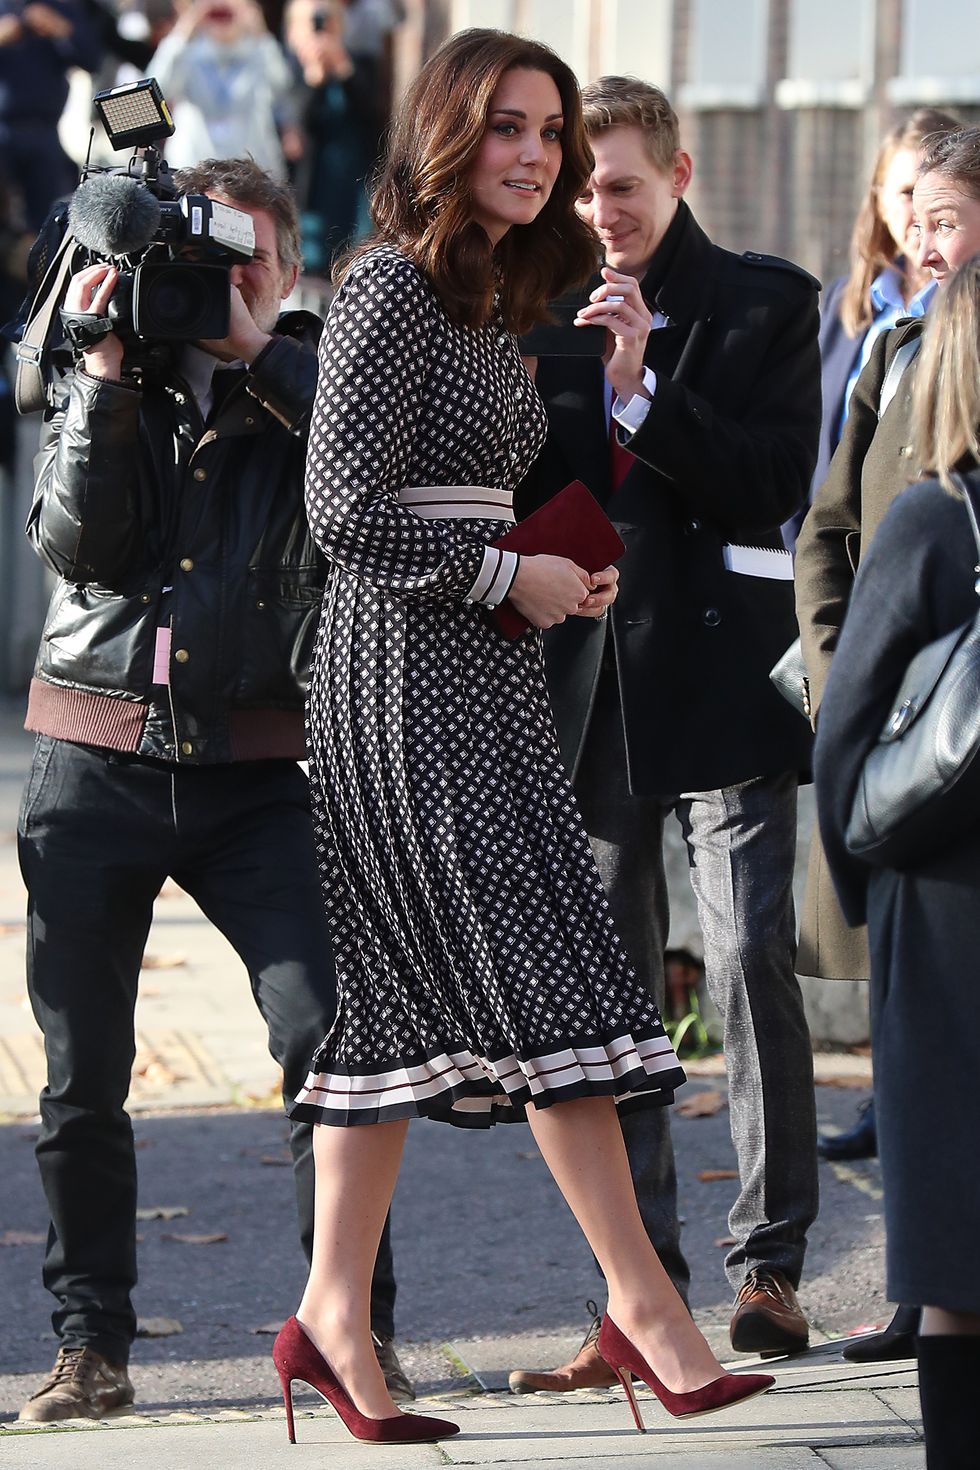 The Duchess Of Cambridges Maternity Style Kate Middletons Pregnancy Fashion 